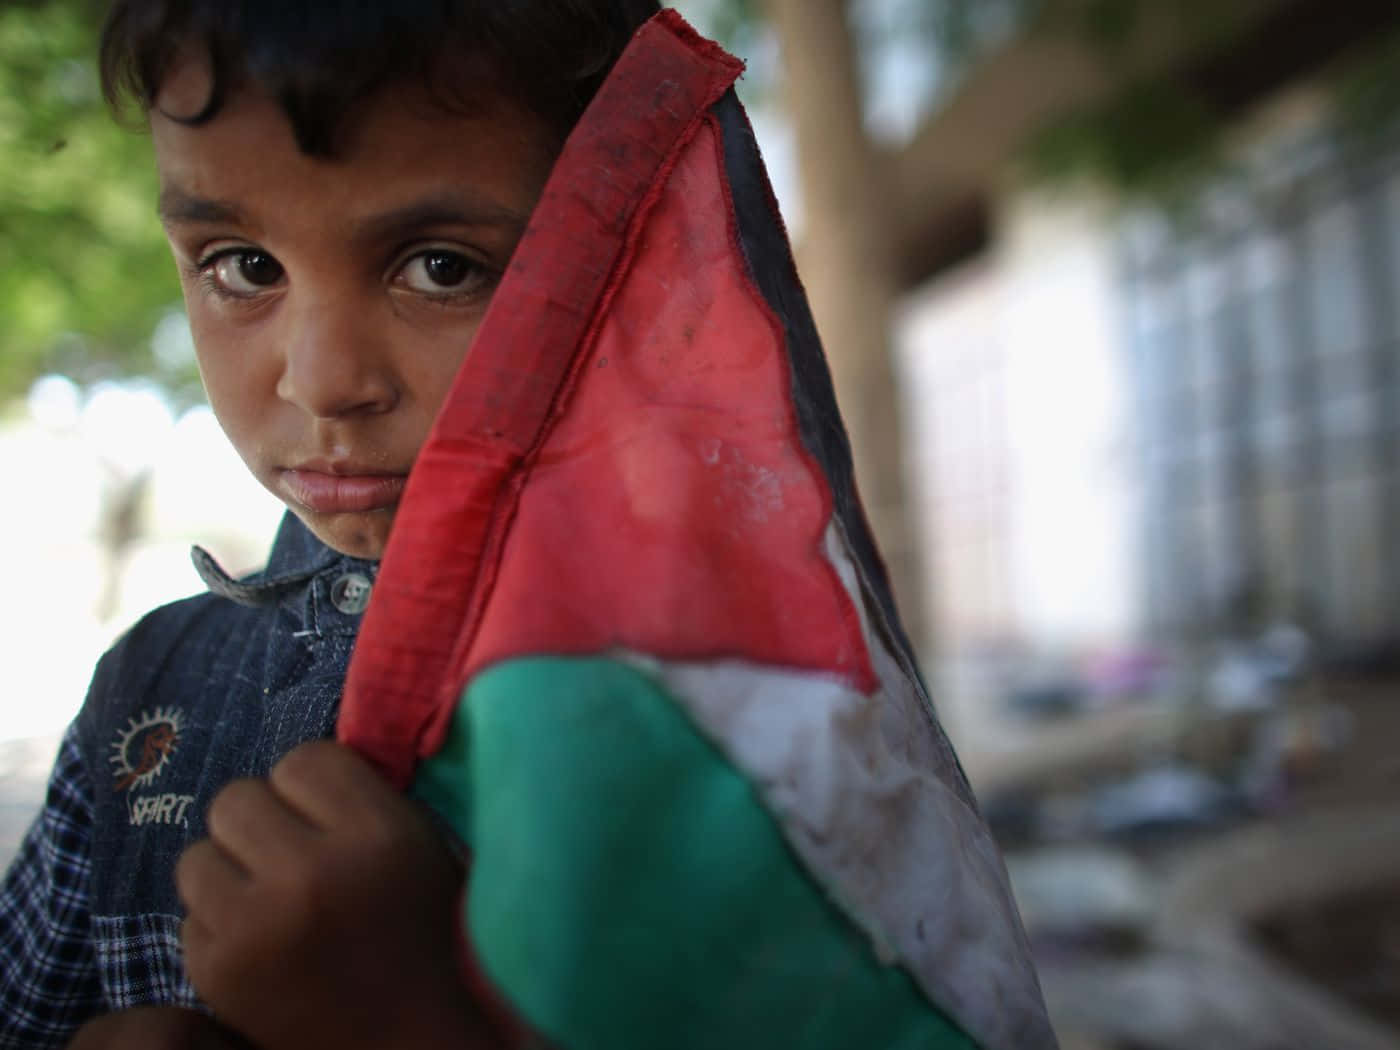 A Young Boy Holding A Palestinian Flag